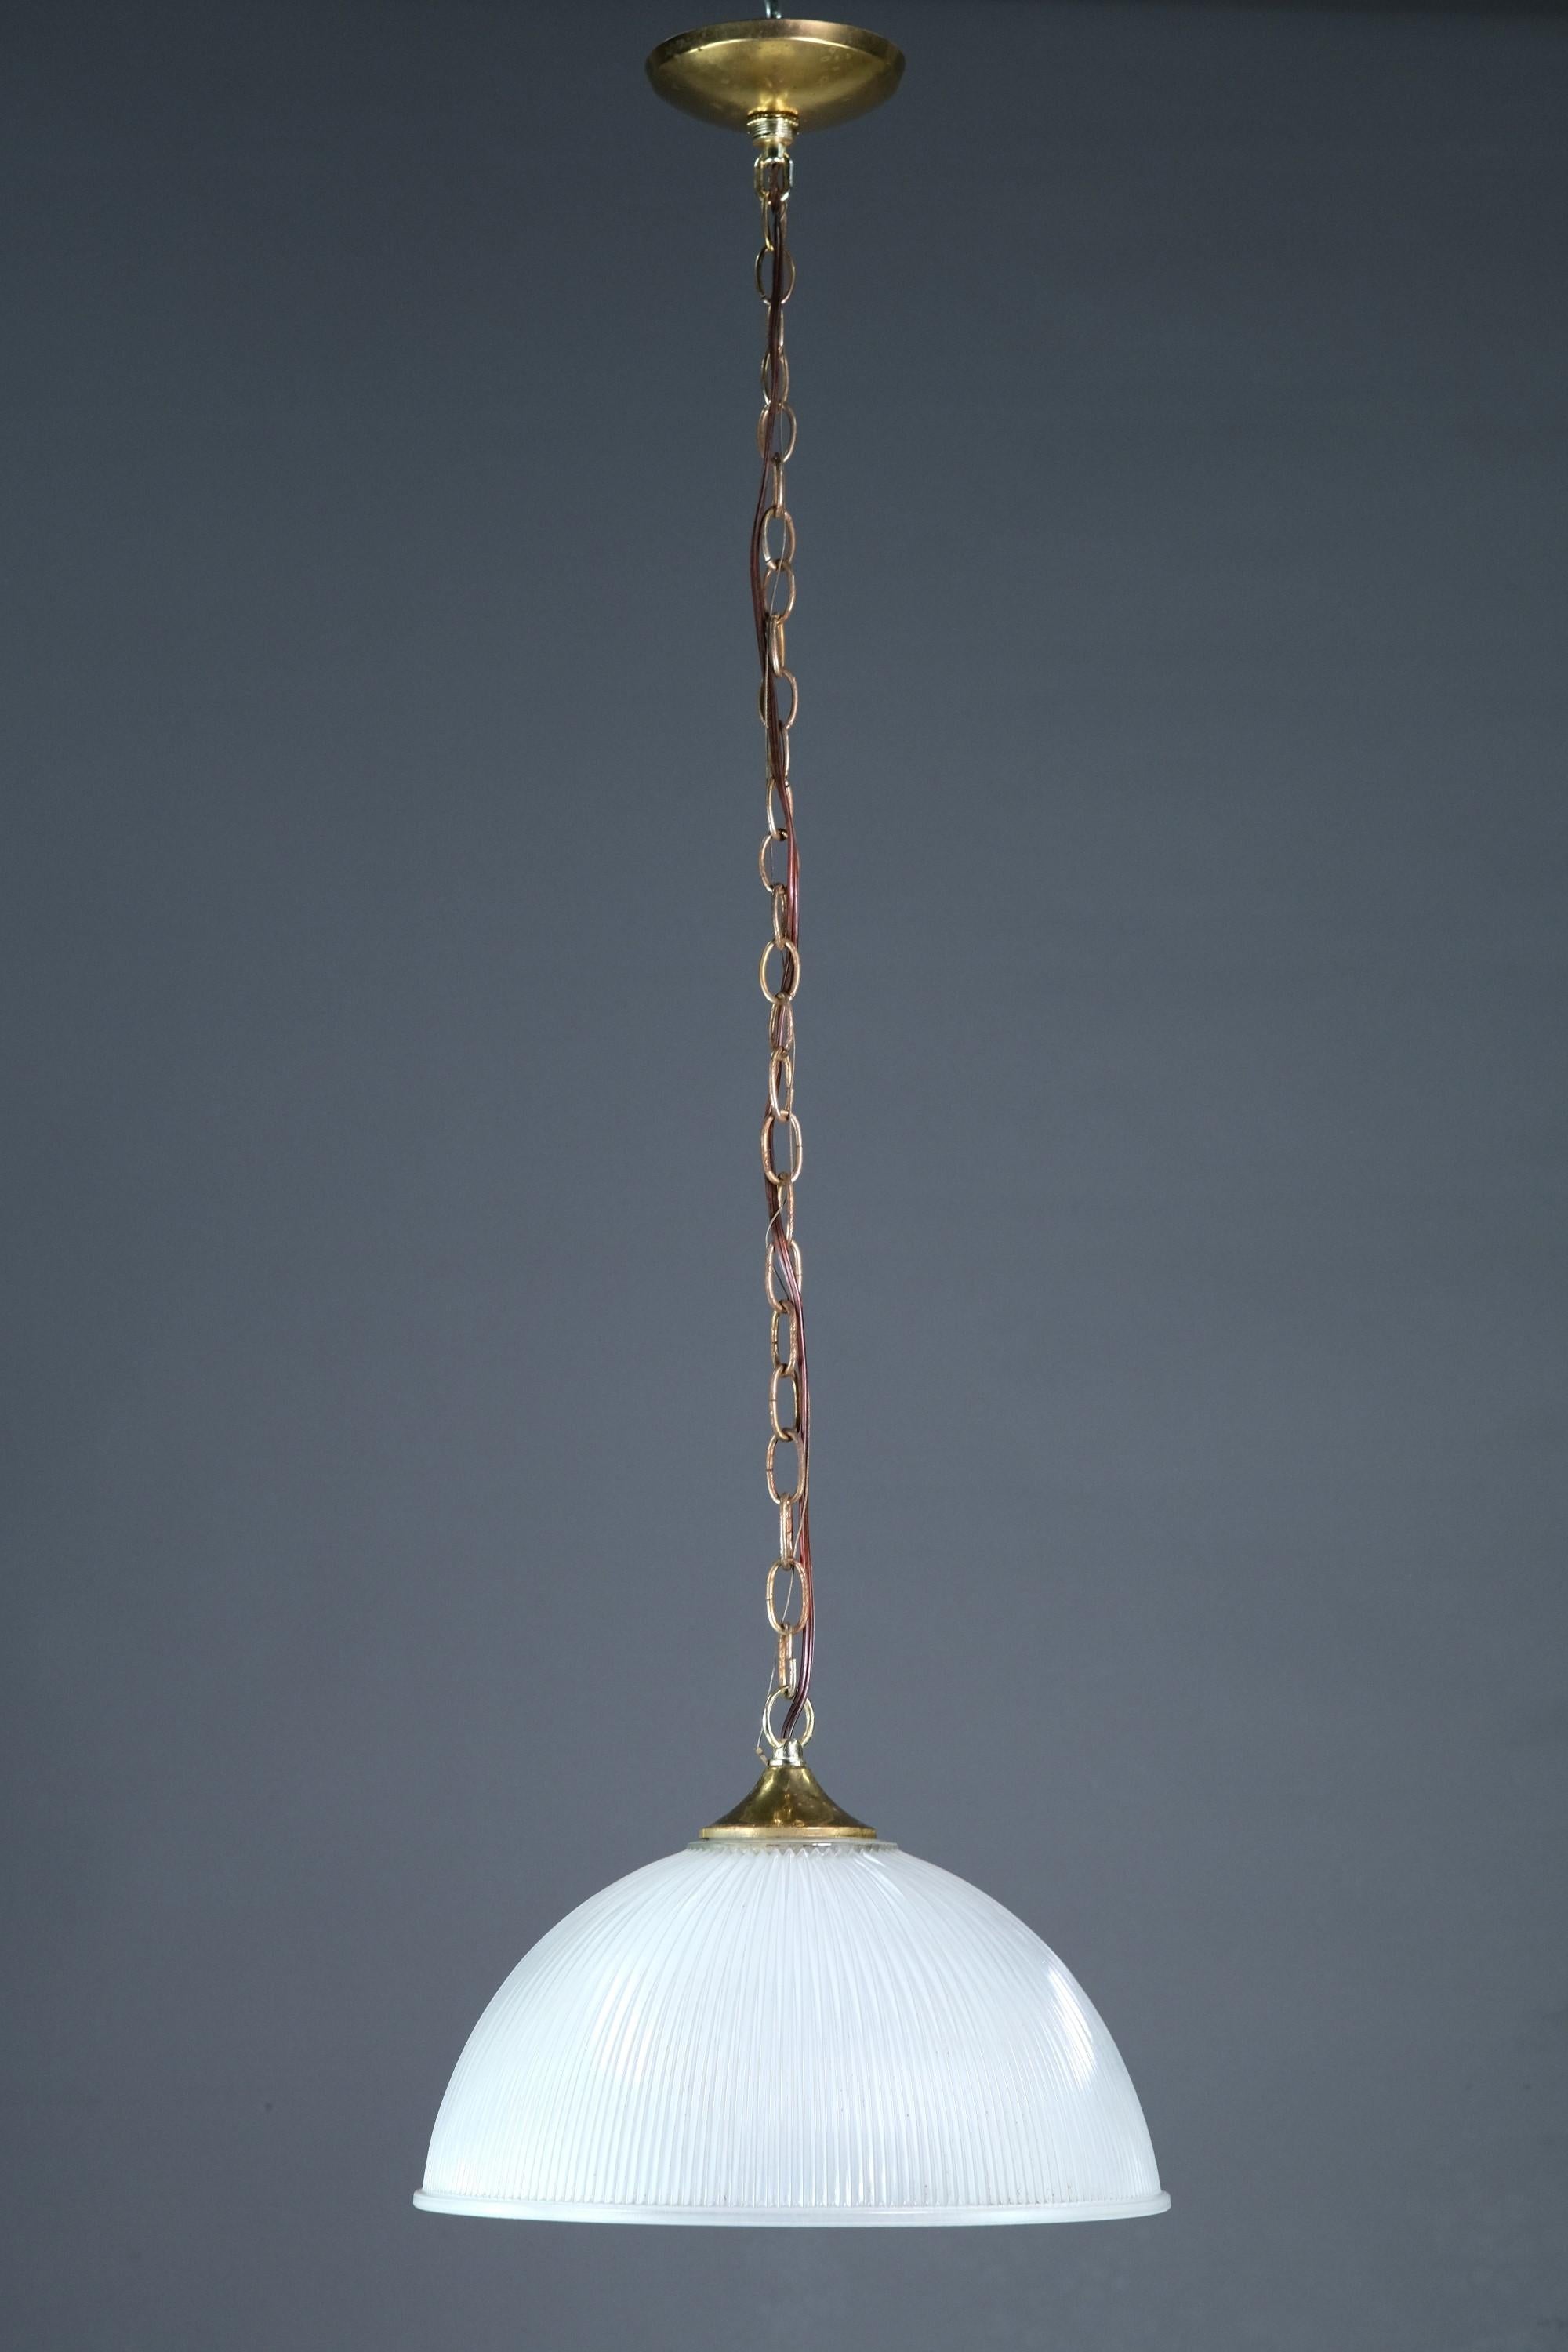 20th cntury half globe pendant light. Shade is both fluted and frosted. Brass hardware. This can be seen at our 400 Gilligan St location in Scranton, PA.